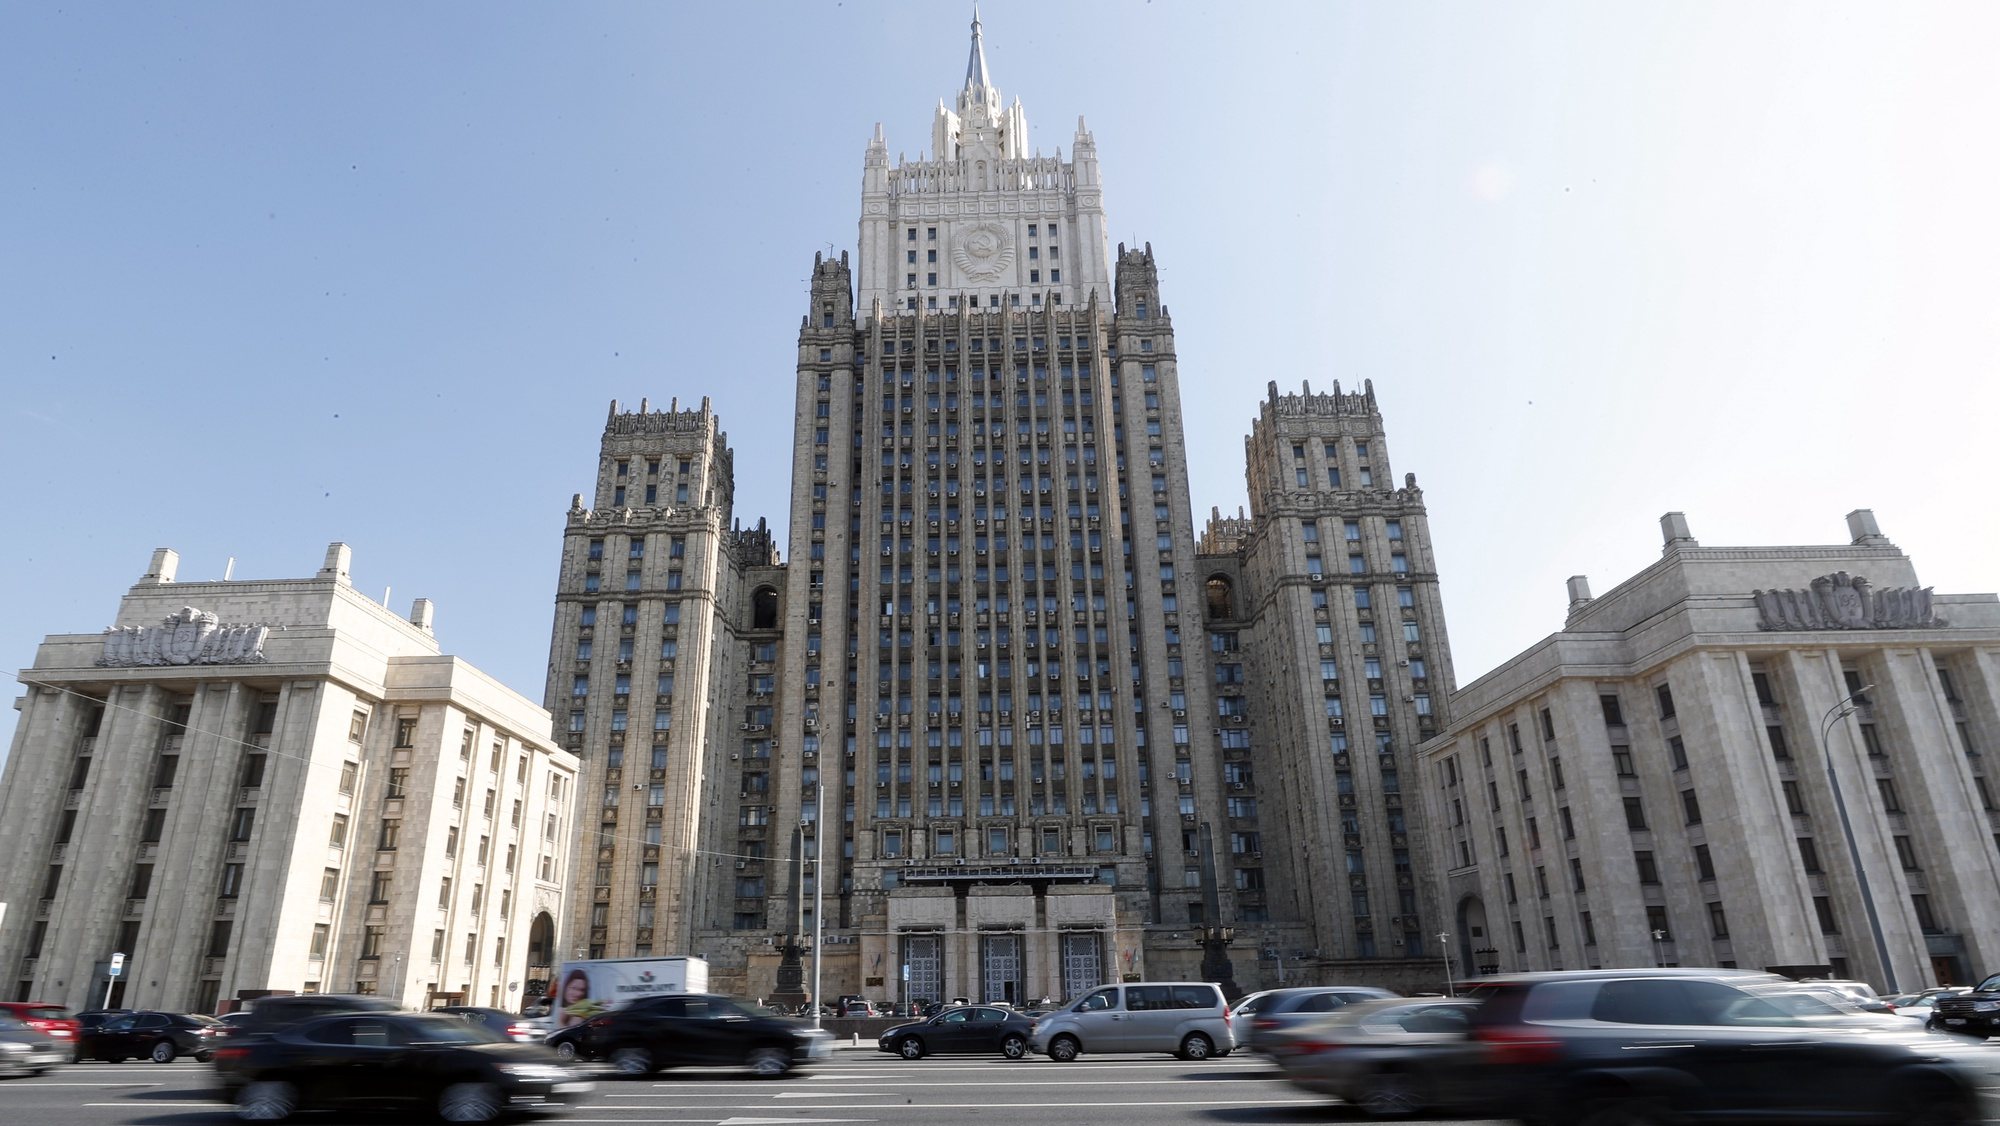 epa07002953 A view of Russian Foreign Ministry building in Moscow, Russia, 07 September 2018. As media reported, the Russian Foreign Ministry spokesperson Maria Zakharova said at a press briefing on 07 September 2018, the United States and the United Kingdom are the principal beneficiaries of the Salisbury incident. The former Russian spy Sergei Skripal aged 66 and his daughter Yulia, aged 33, were found suffering from extreme exposure to a rare nerve agent in Salisbury southern England, on 04 March 2018.  EPA/MAXIM SHIPENKOV